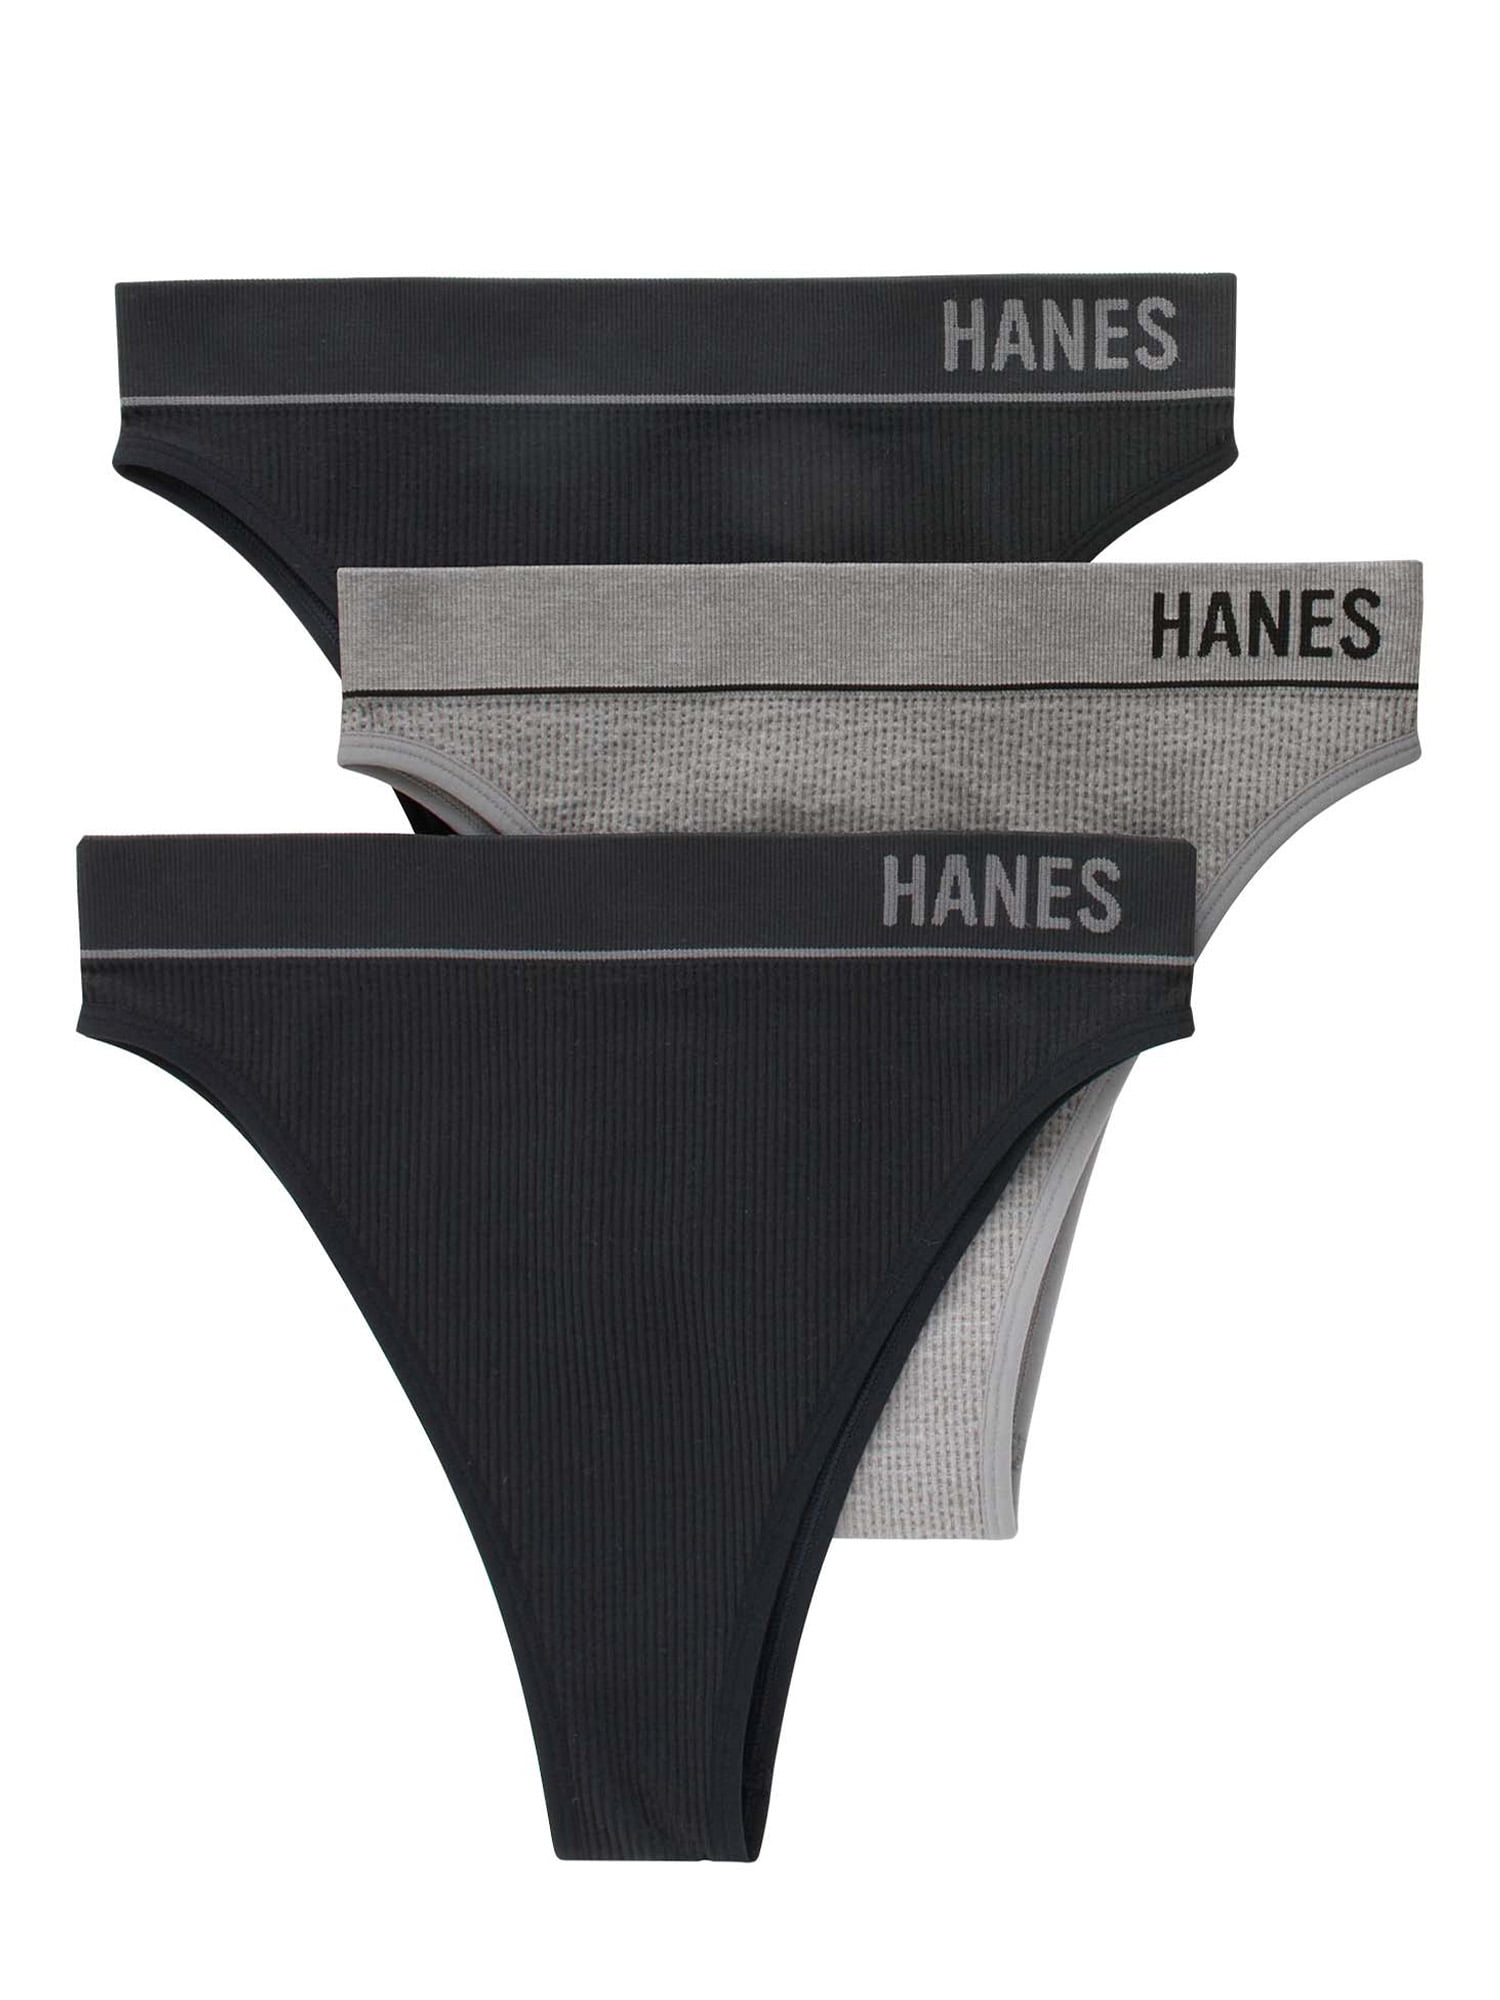 Hanes - Our new Hanes Classics Retro Rib collection is seriously da bomb.  This stretchy, seamless ribbed knit fabric is made from 50% recycled yarns.  ♻️ Shop now at Walmart. ✨ Shop